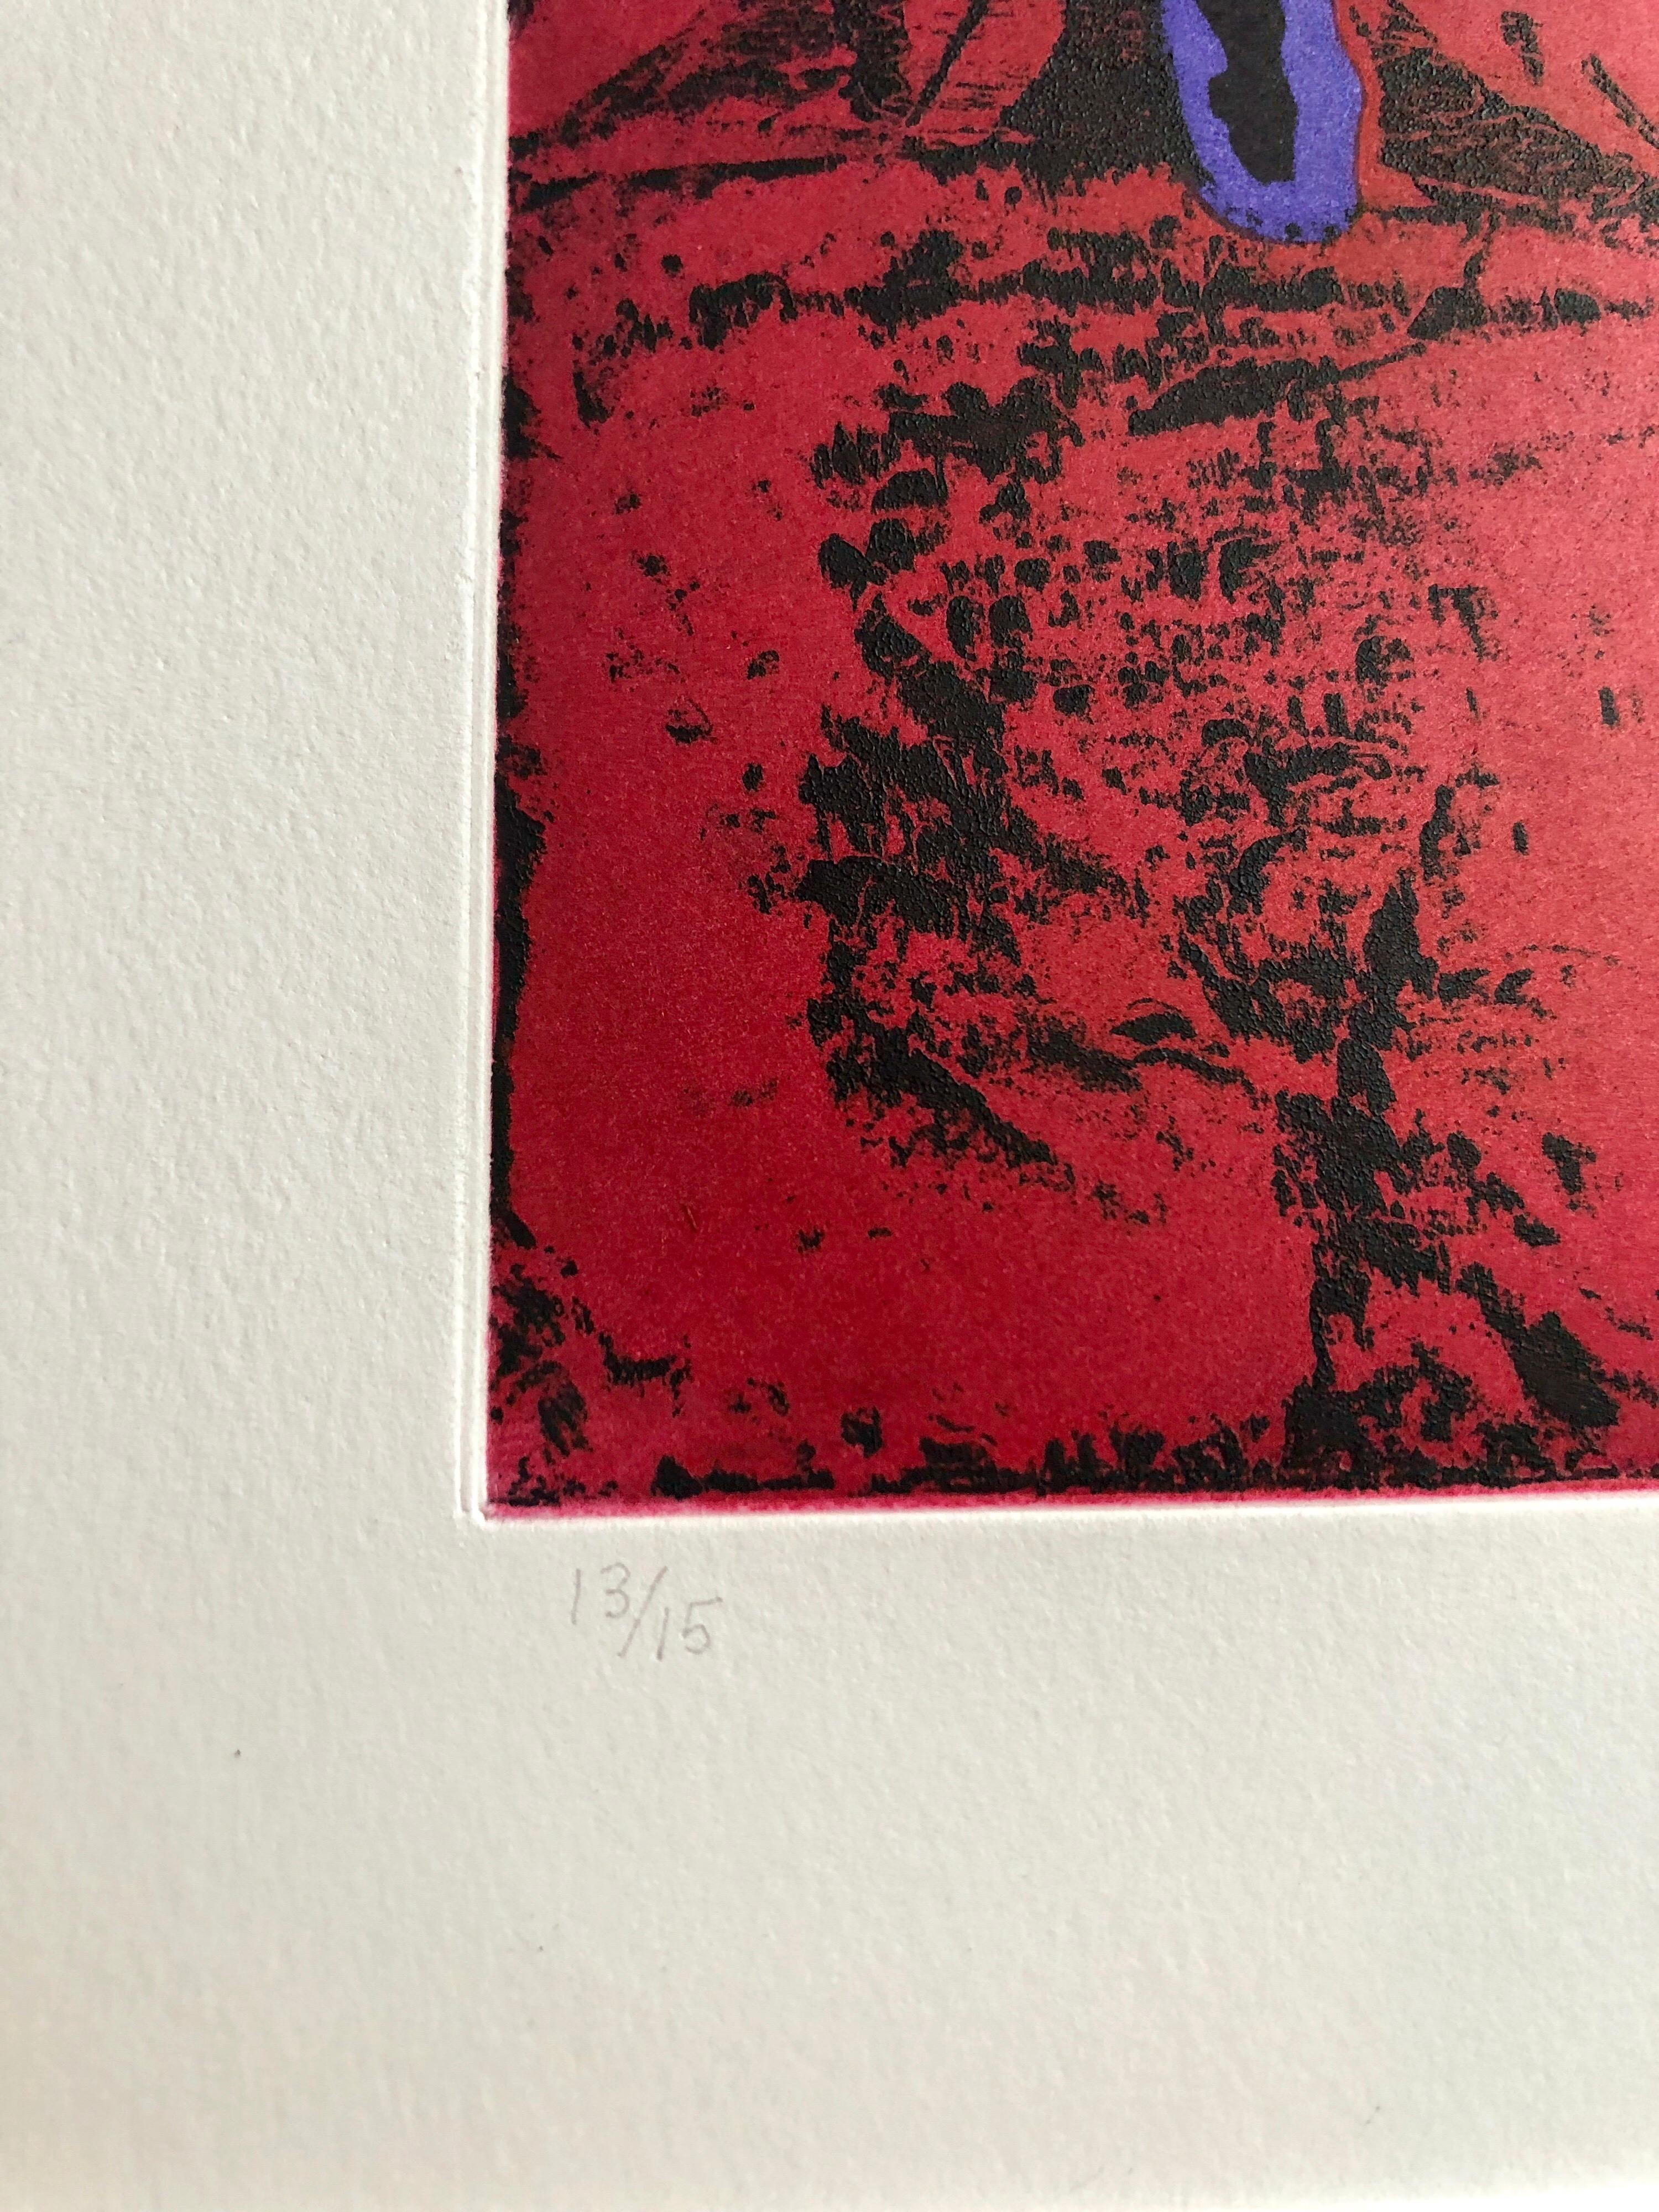 Untitled #11 Two Forms Red Ground Abstract Expressionist Aquatint Etching For Sale 5